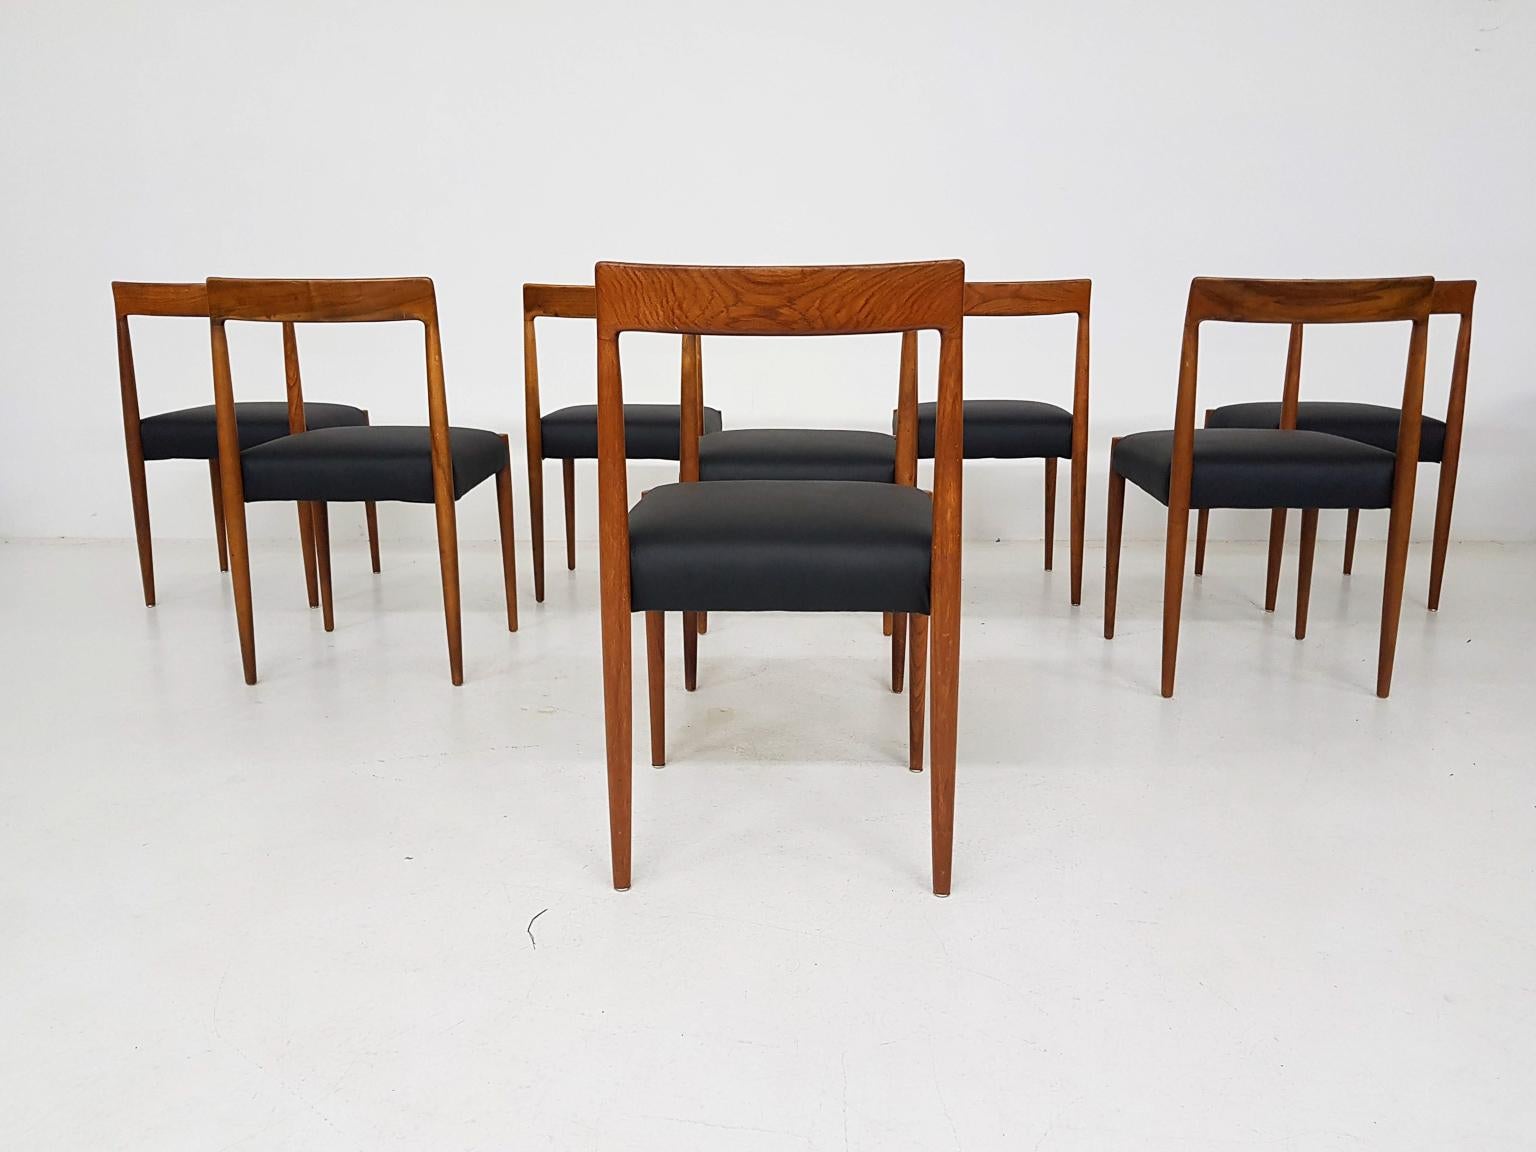 20th Century Set of 8 Teak and Leather Dining Chairs by Lukbe, Germany, 1960s